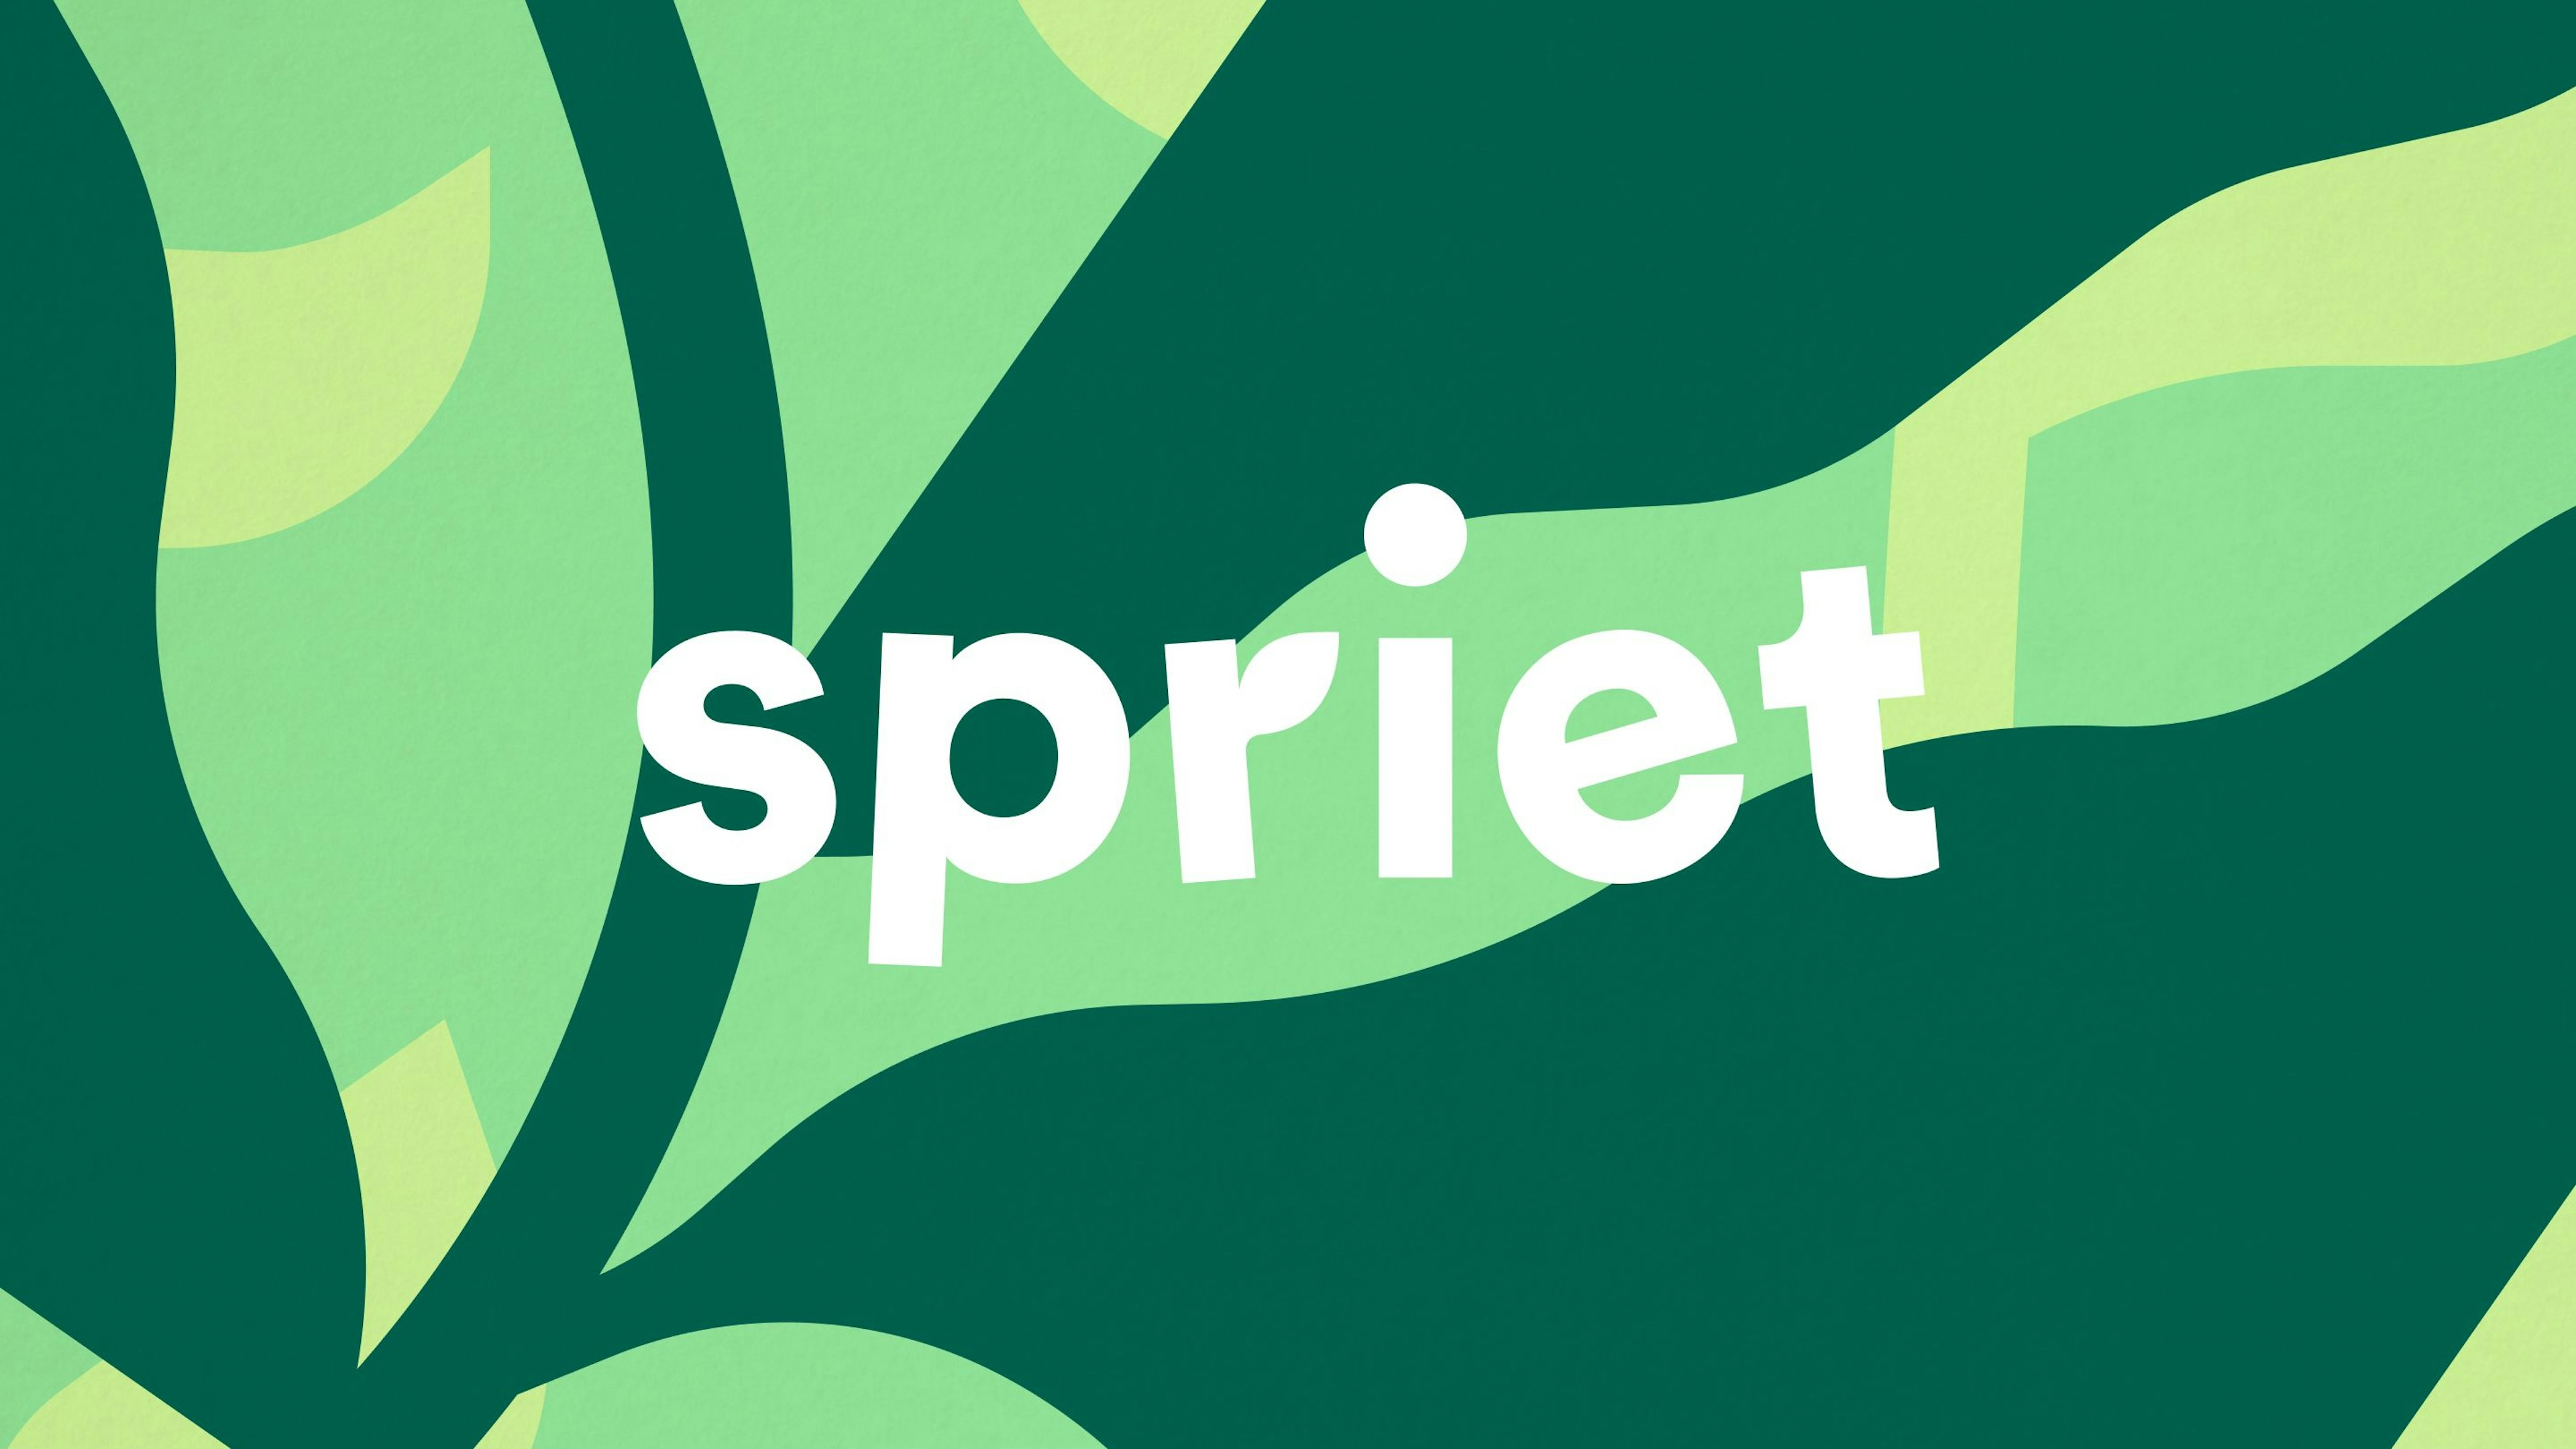 the spriet logo on a green background